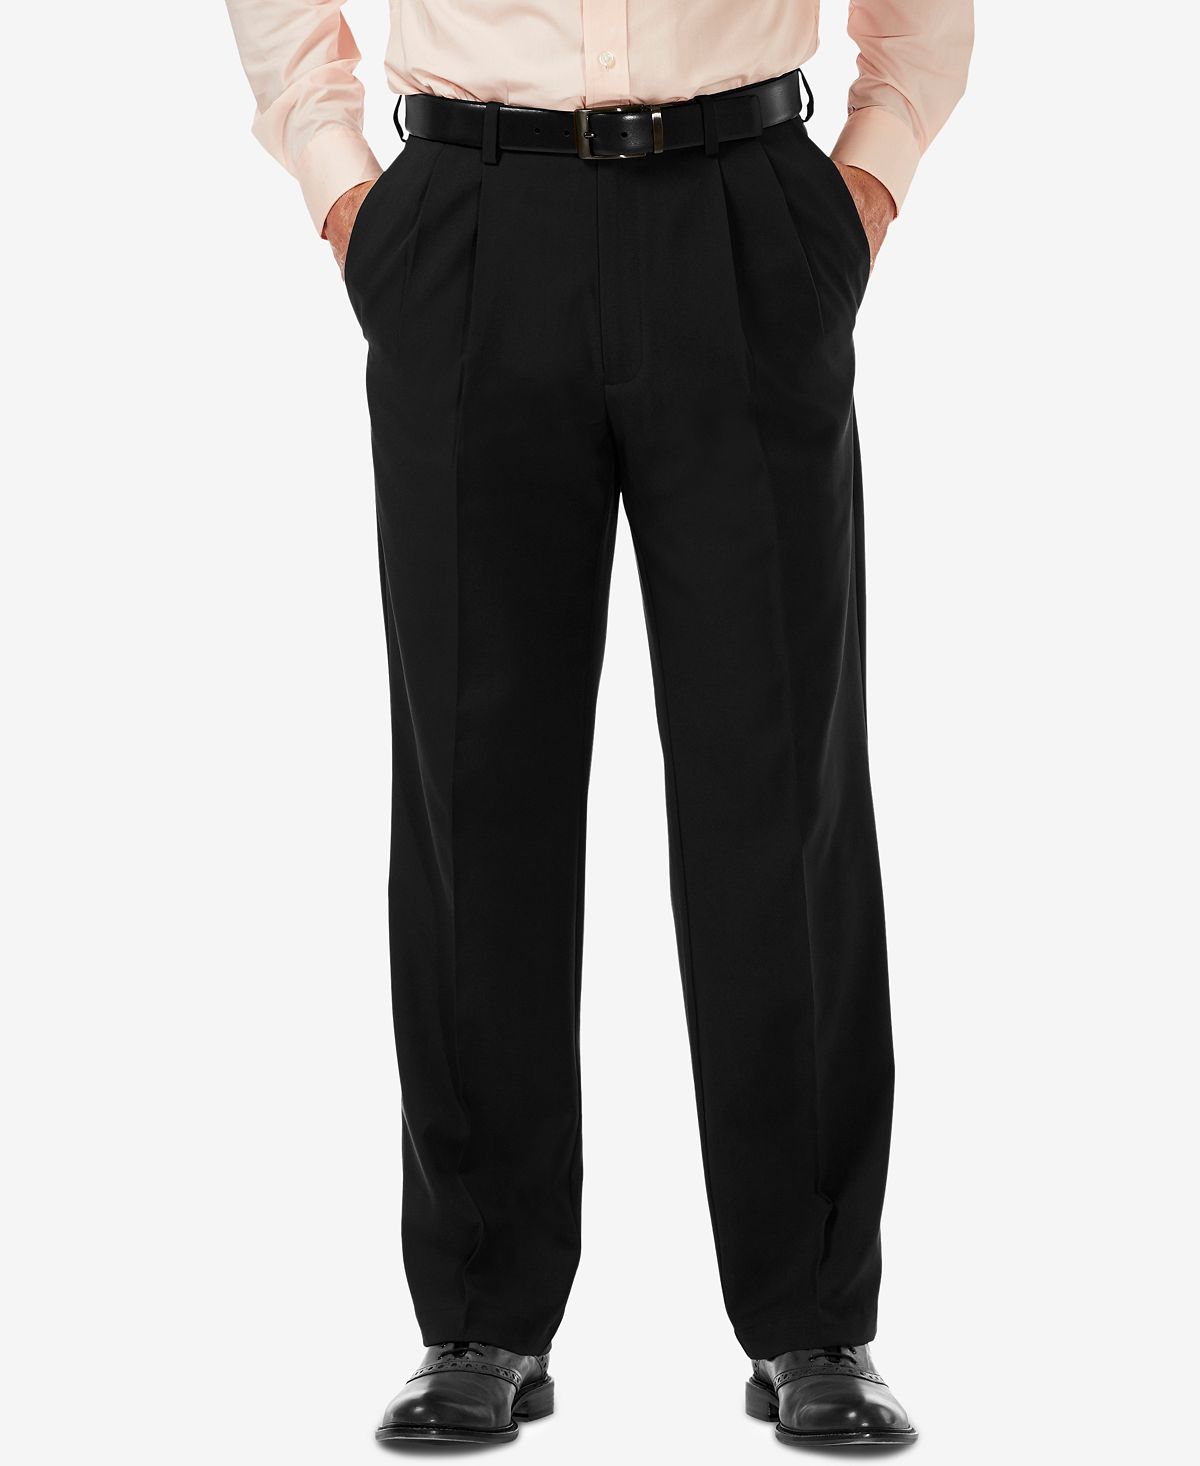 Haggar Cool 18 Pro Classic-fit Expandable Waist Pleated Stretch Dress Pants Black